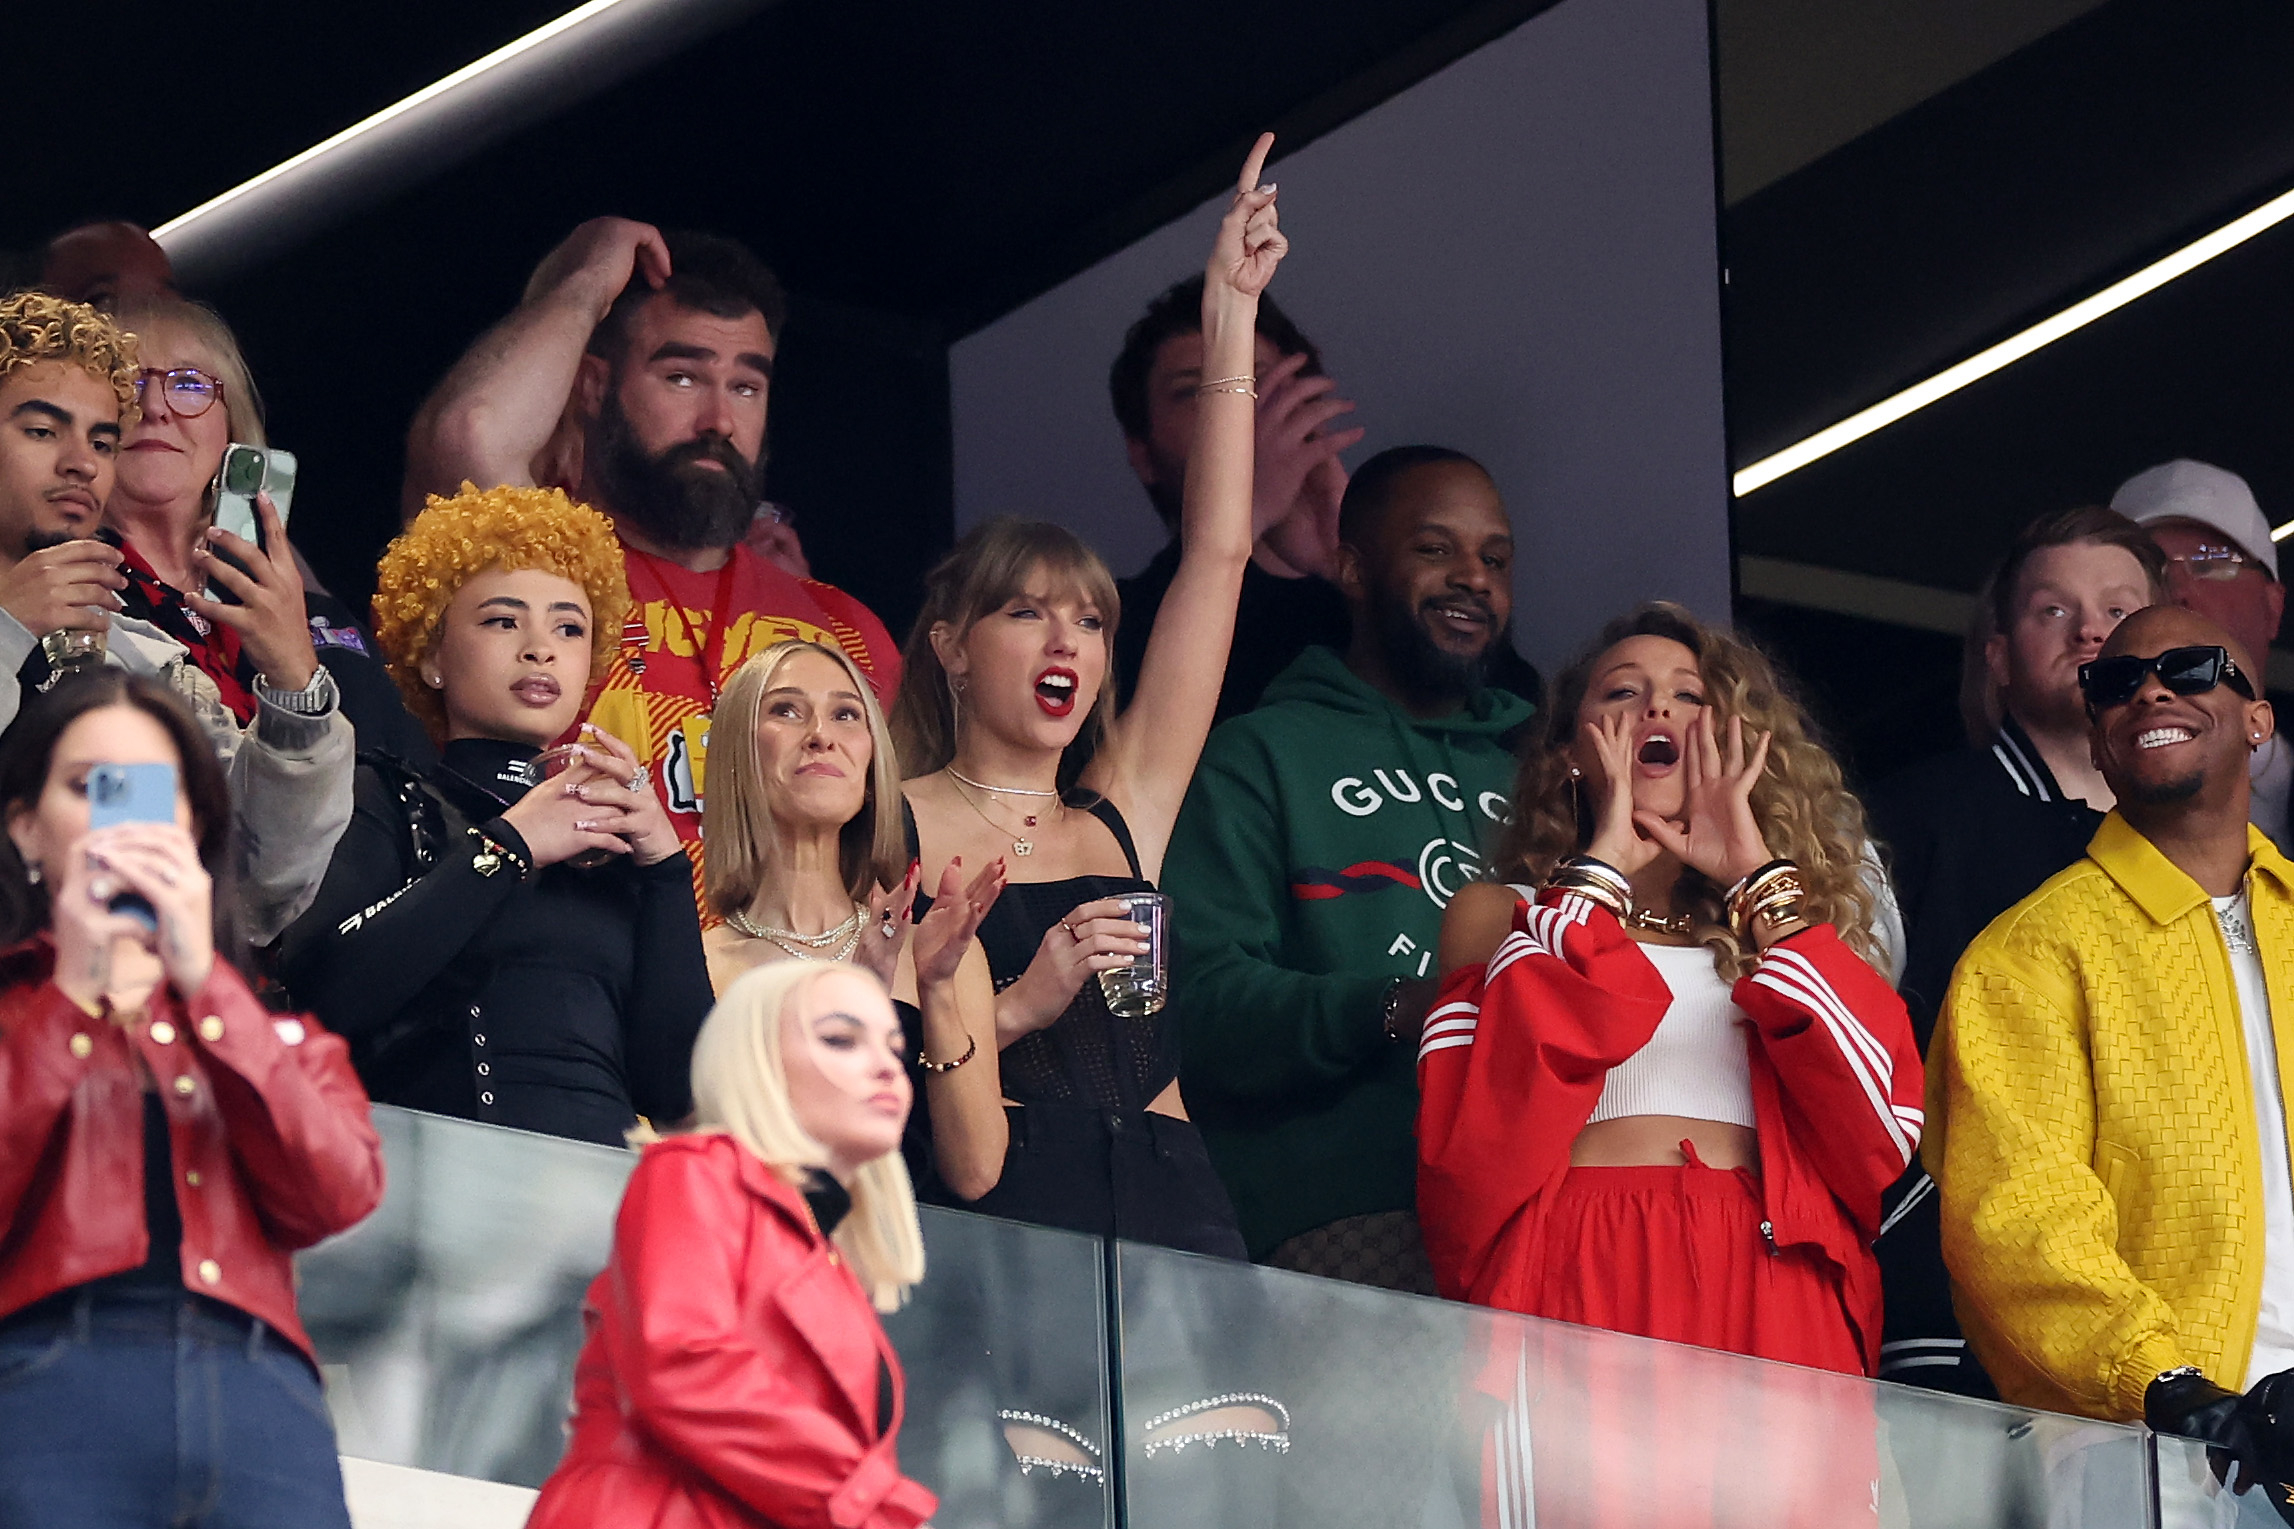 Ice Spice, Taylor Swift, Blake Lively, and more at the Super Bowl